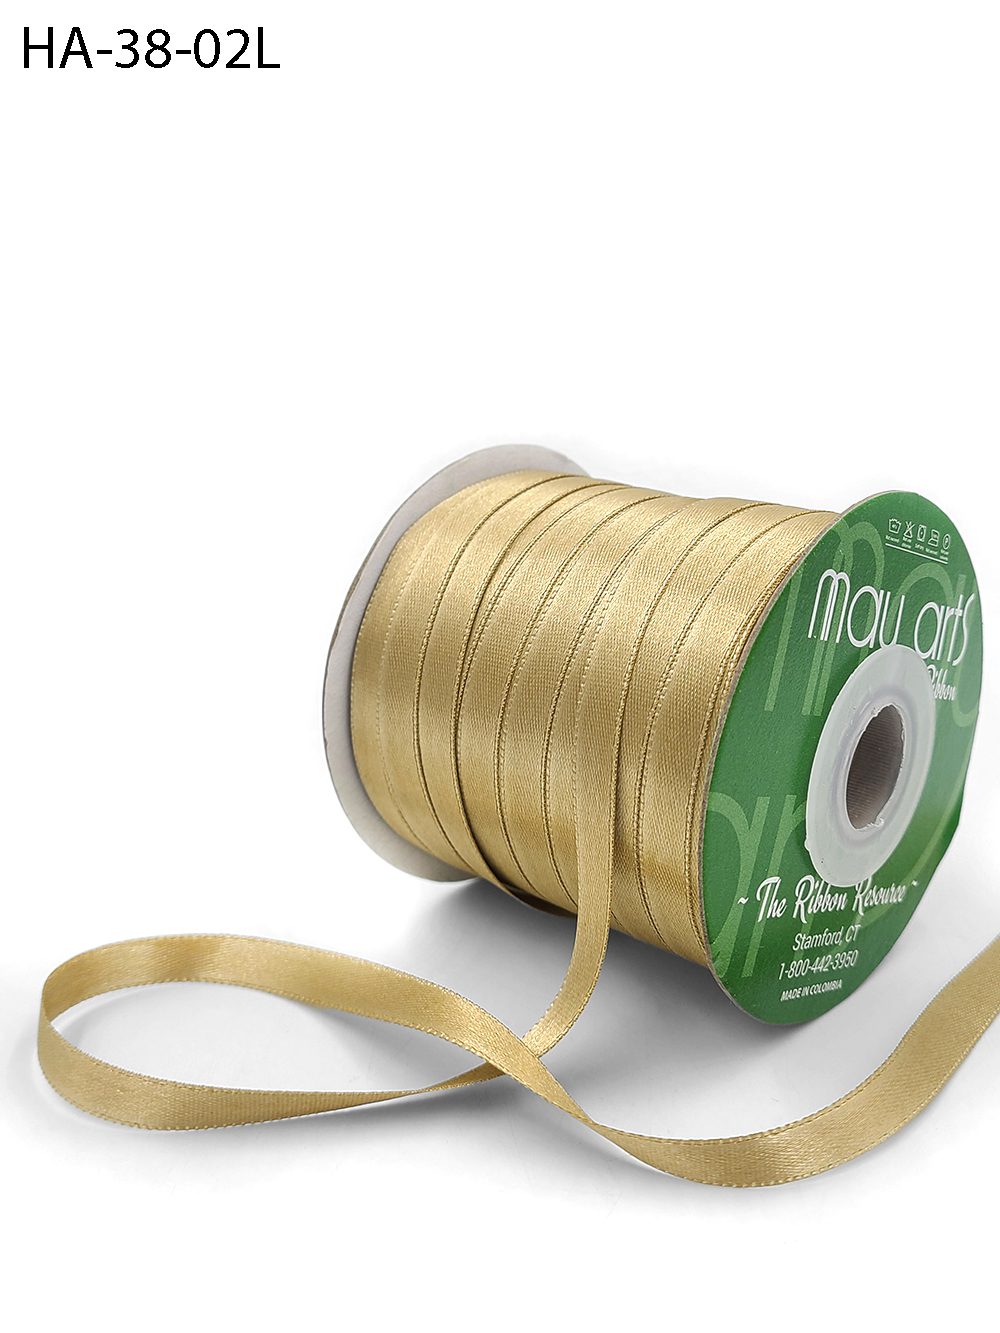 38mm Width 100Yards Double Faced Satin Ribbons For DIY Bow Craft Ribbons  Card Gifts Party Wedding Decorations Supplies290C From Ch9807, $18.48